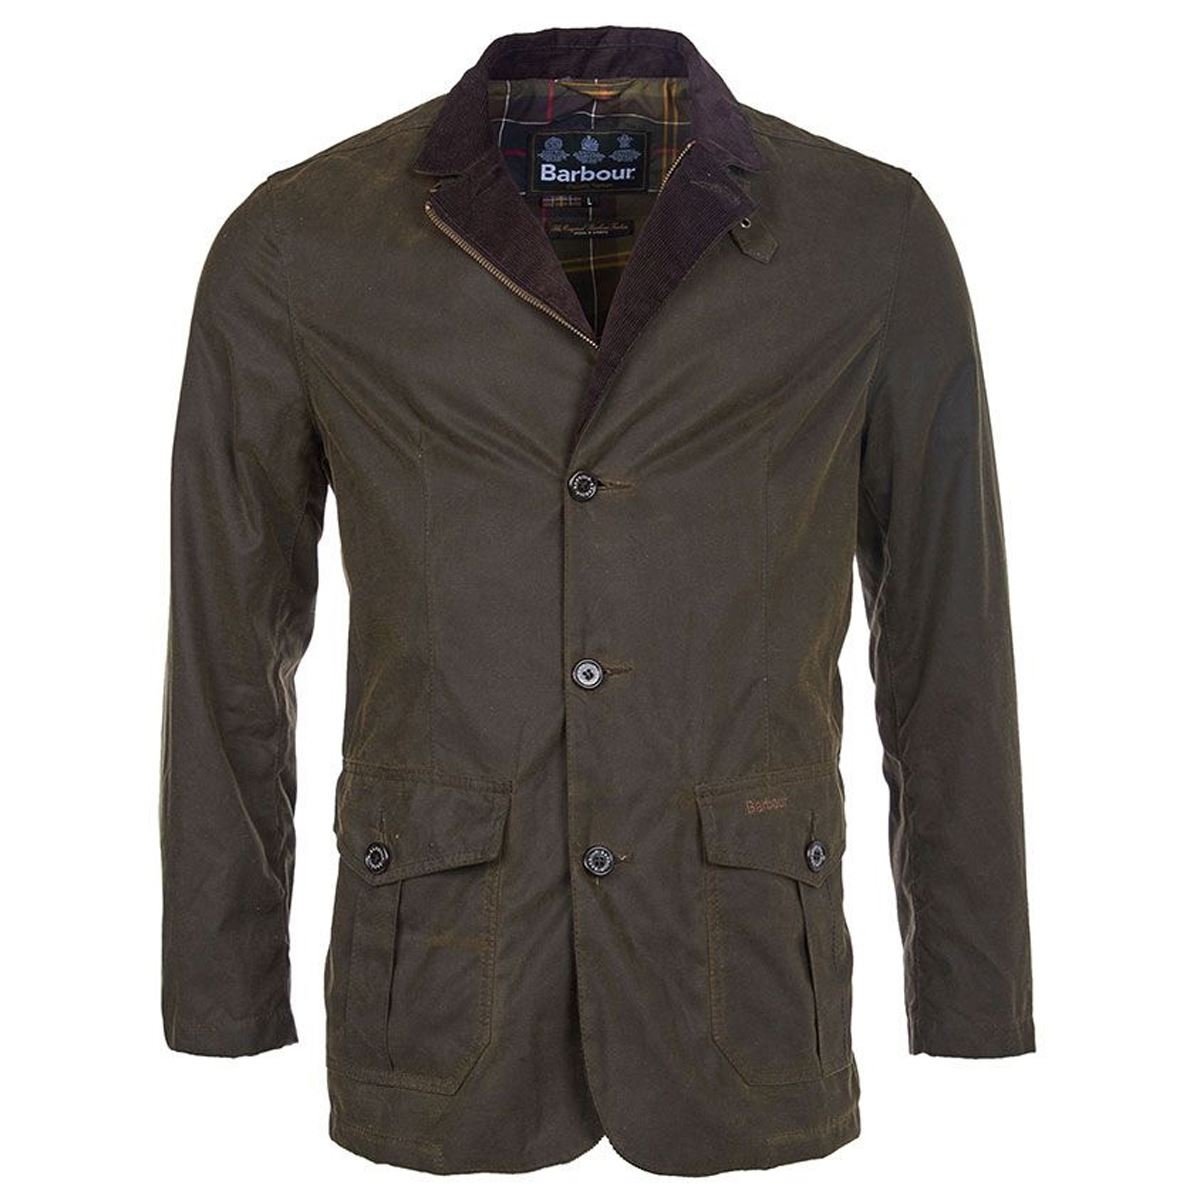 What materials compose the Barbour Lutz wax jacket?